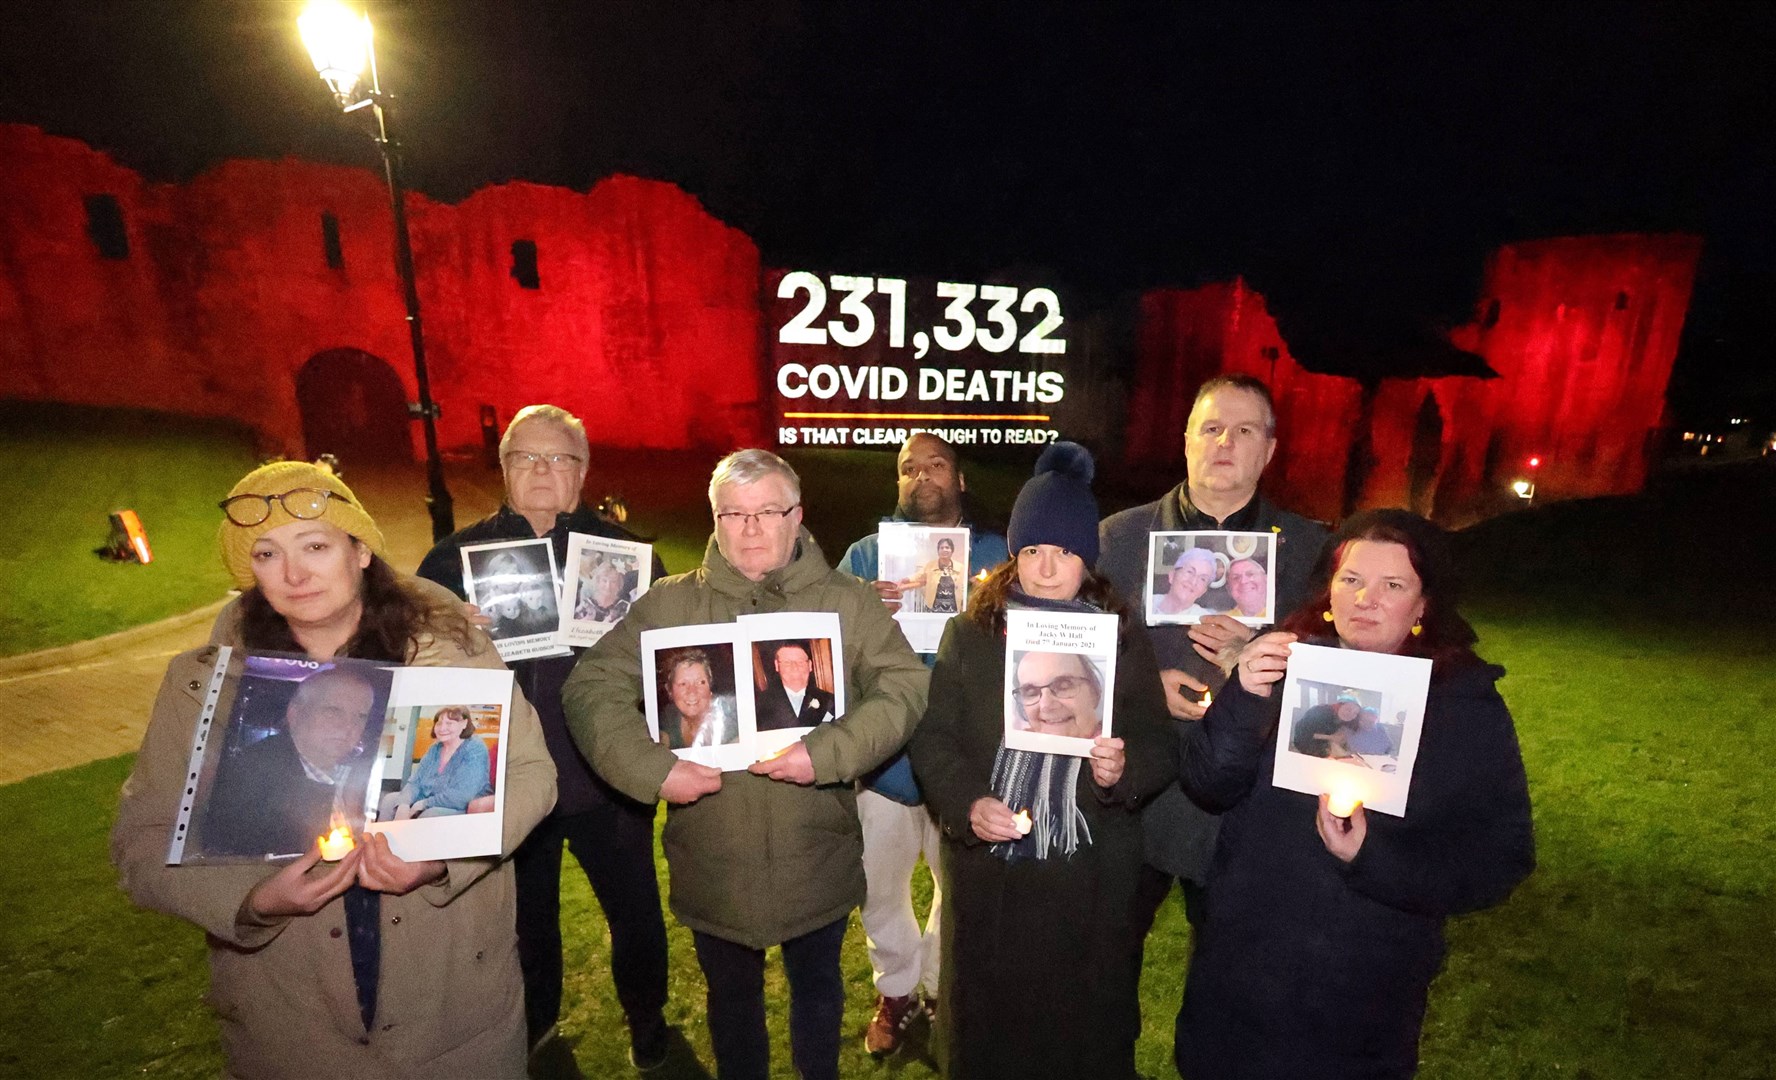 Grieving families holding a vigil for loved ones lost to Covid-19 outside Barnard Castle (Raouil Dixon/PA)